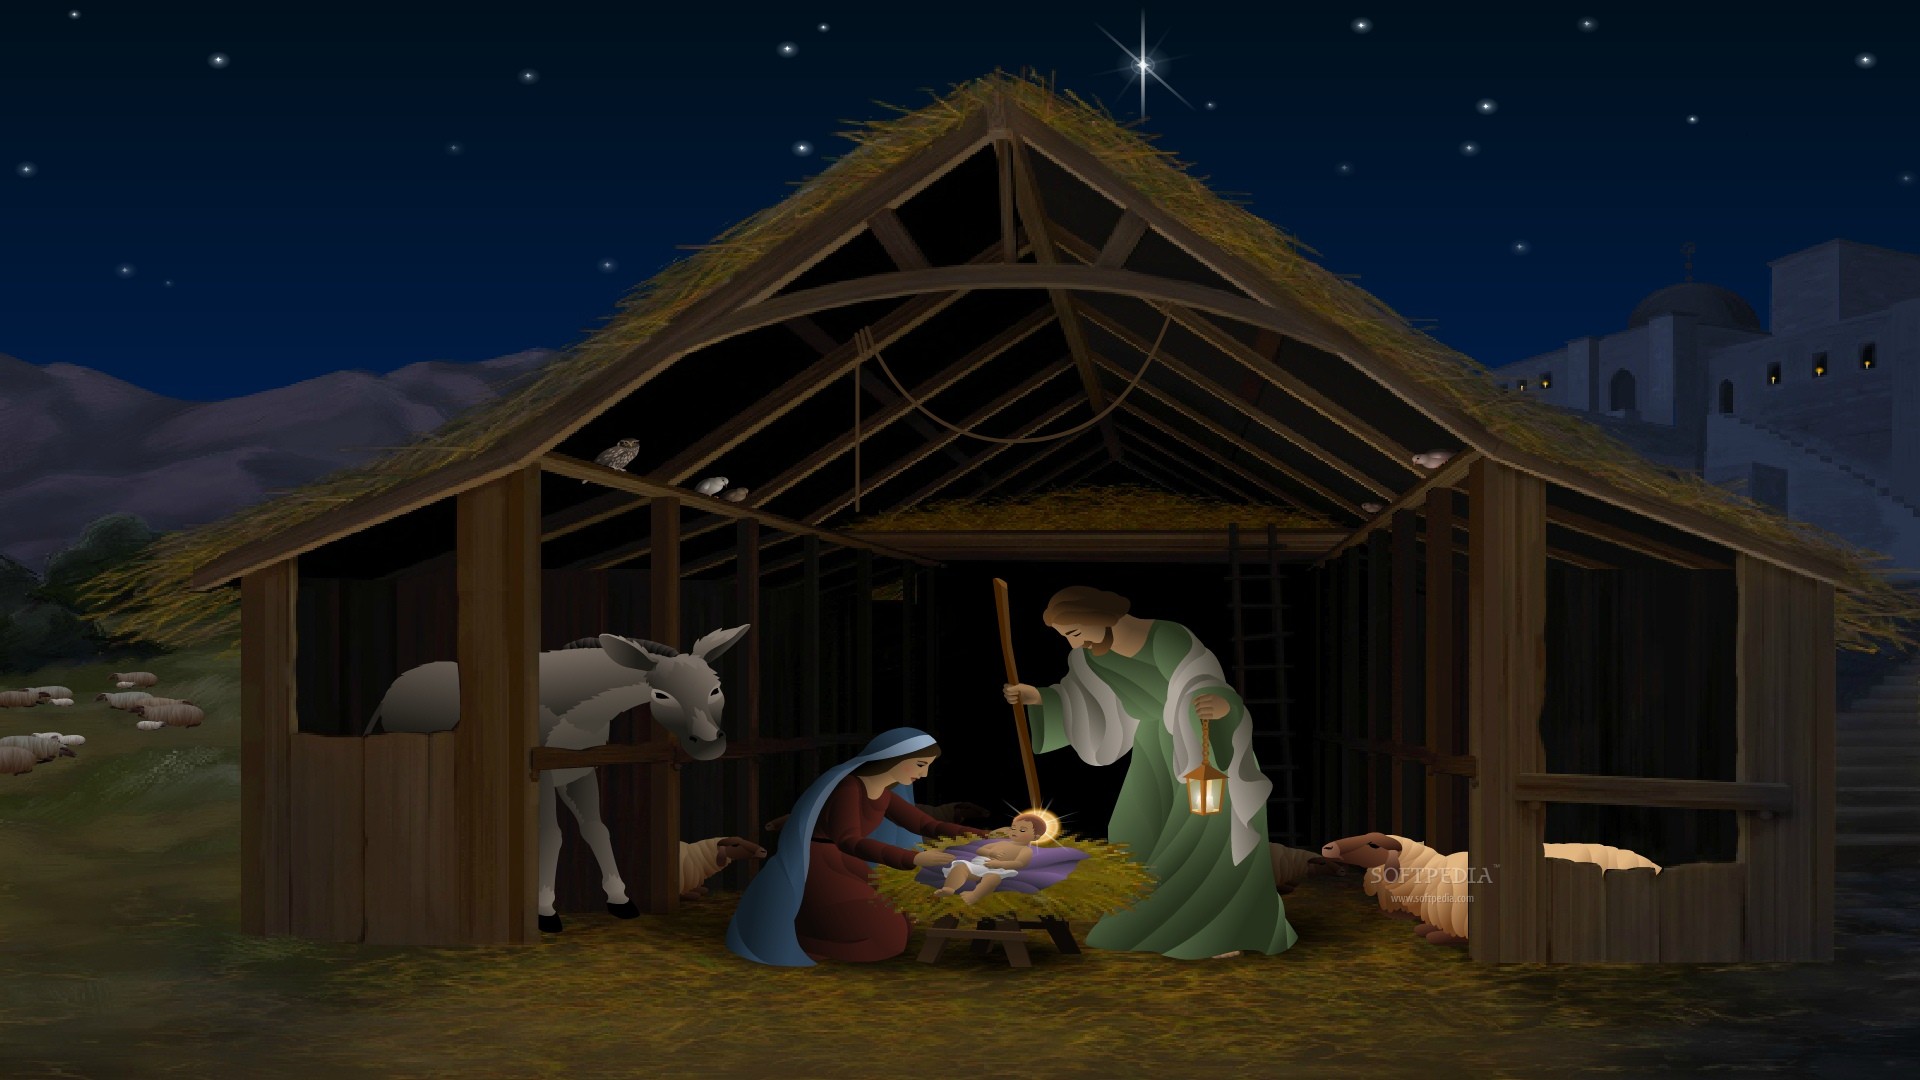 First Christmas Screensaver The Scene Of Nativity Is Pictured In